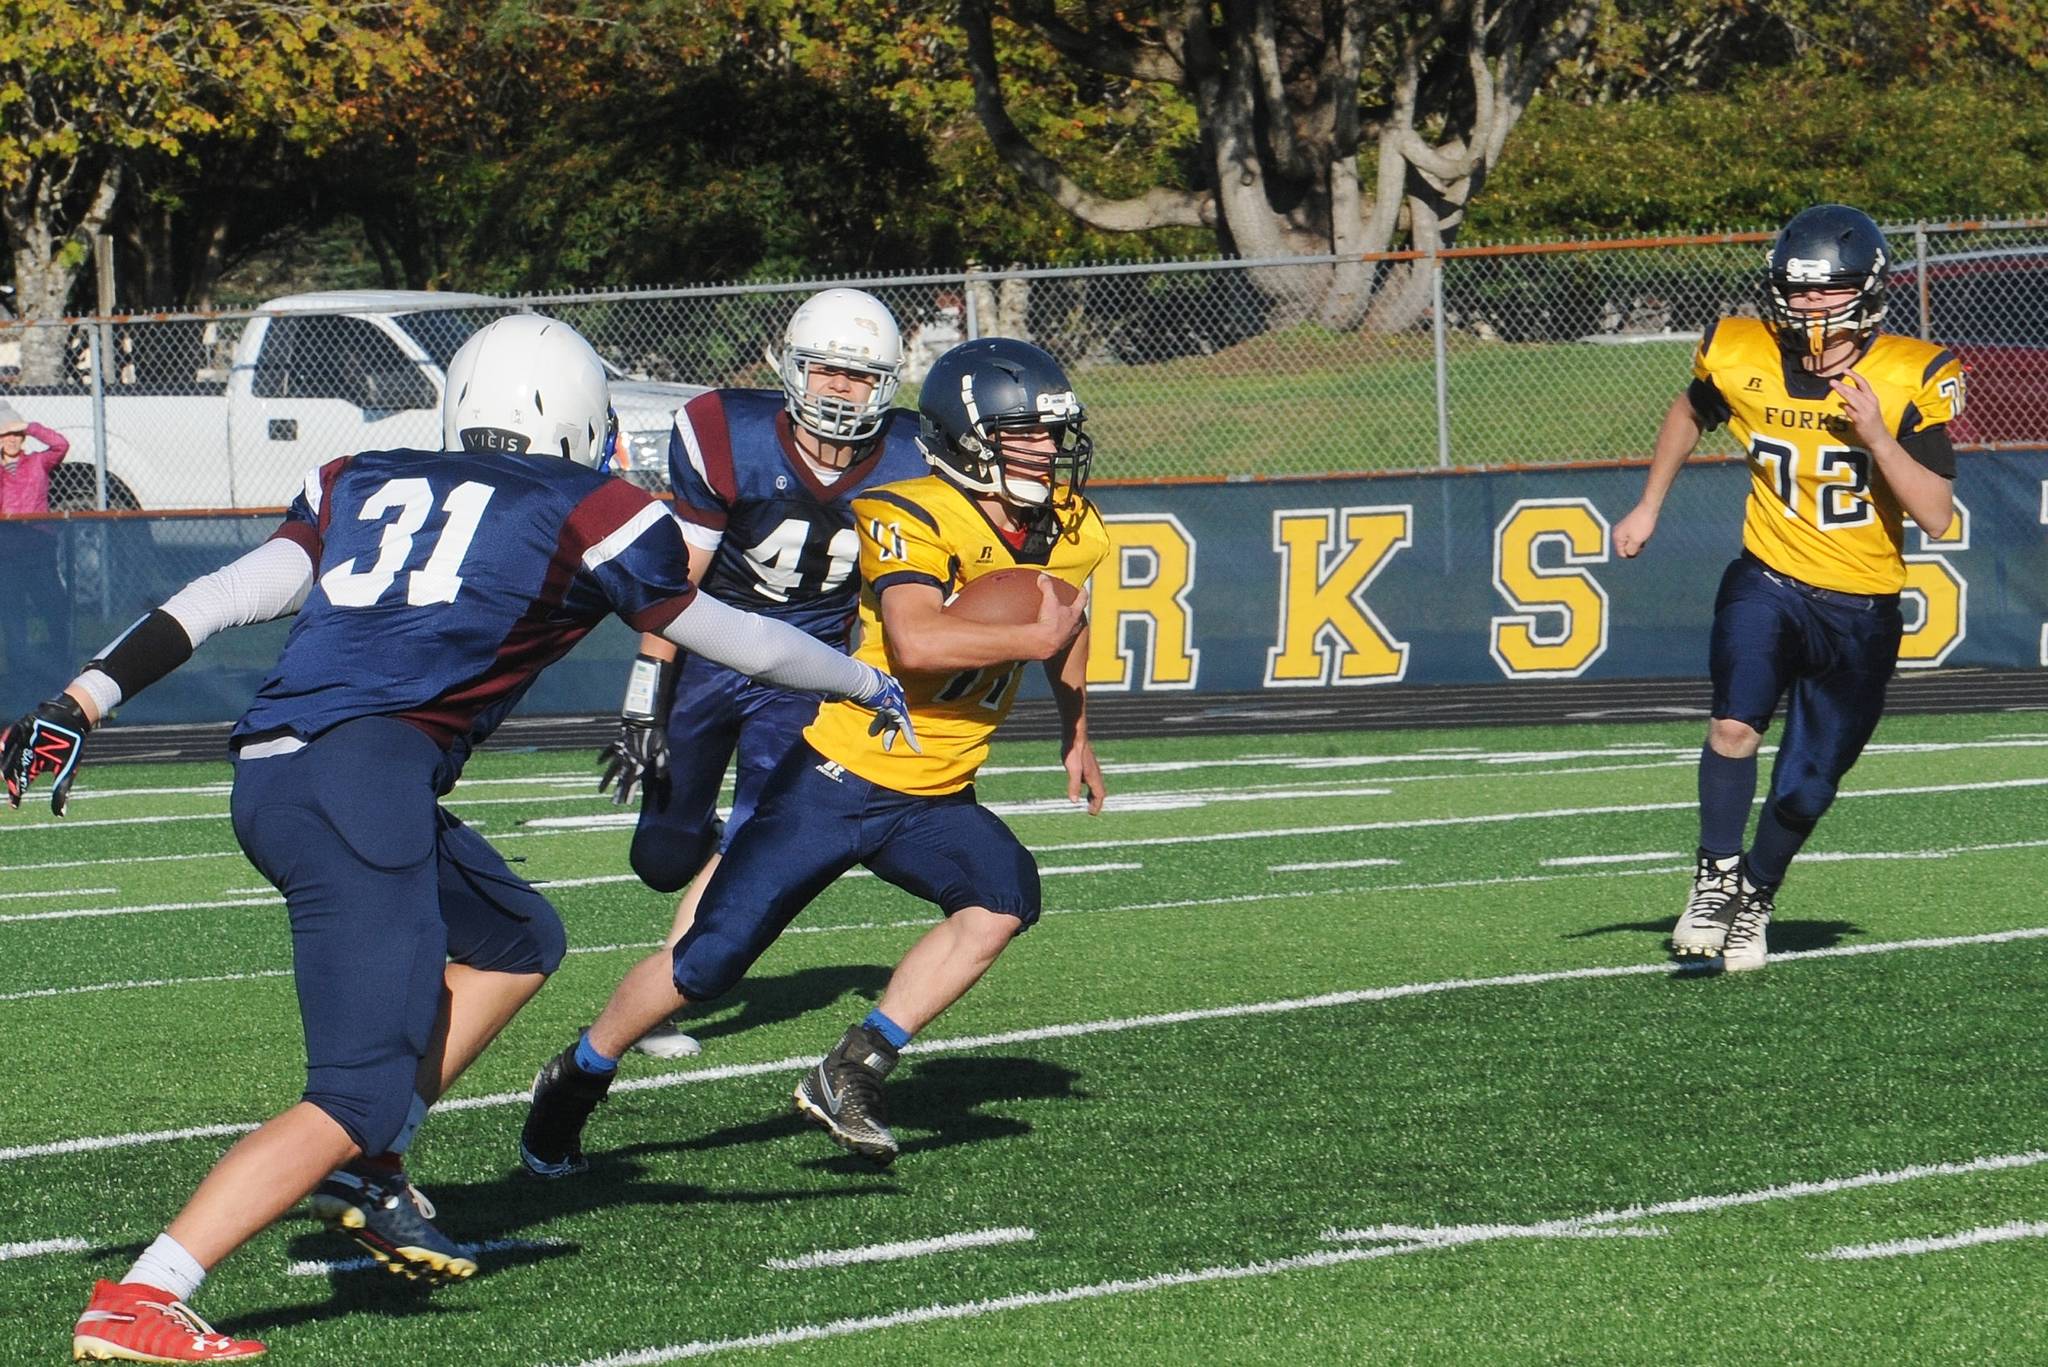 Forks Jr. High running back Walker Wheeler runs past Stevens’ defenders for a big gain during this game with the Stampeders at Spartan Stadium where Forks defeated Stevens 8-6. Also in on the action is Spartan Jacob Berry (72). Photo by Lonnie Archibald